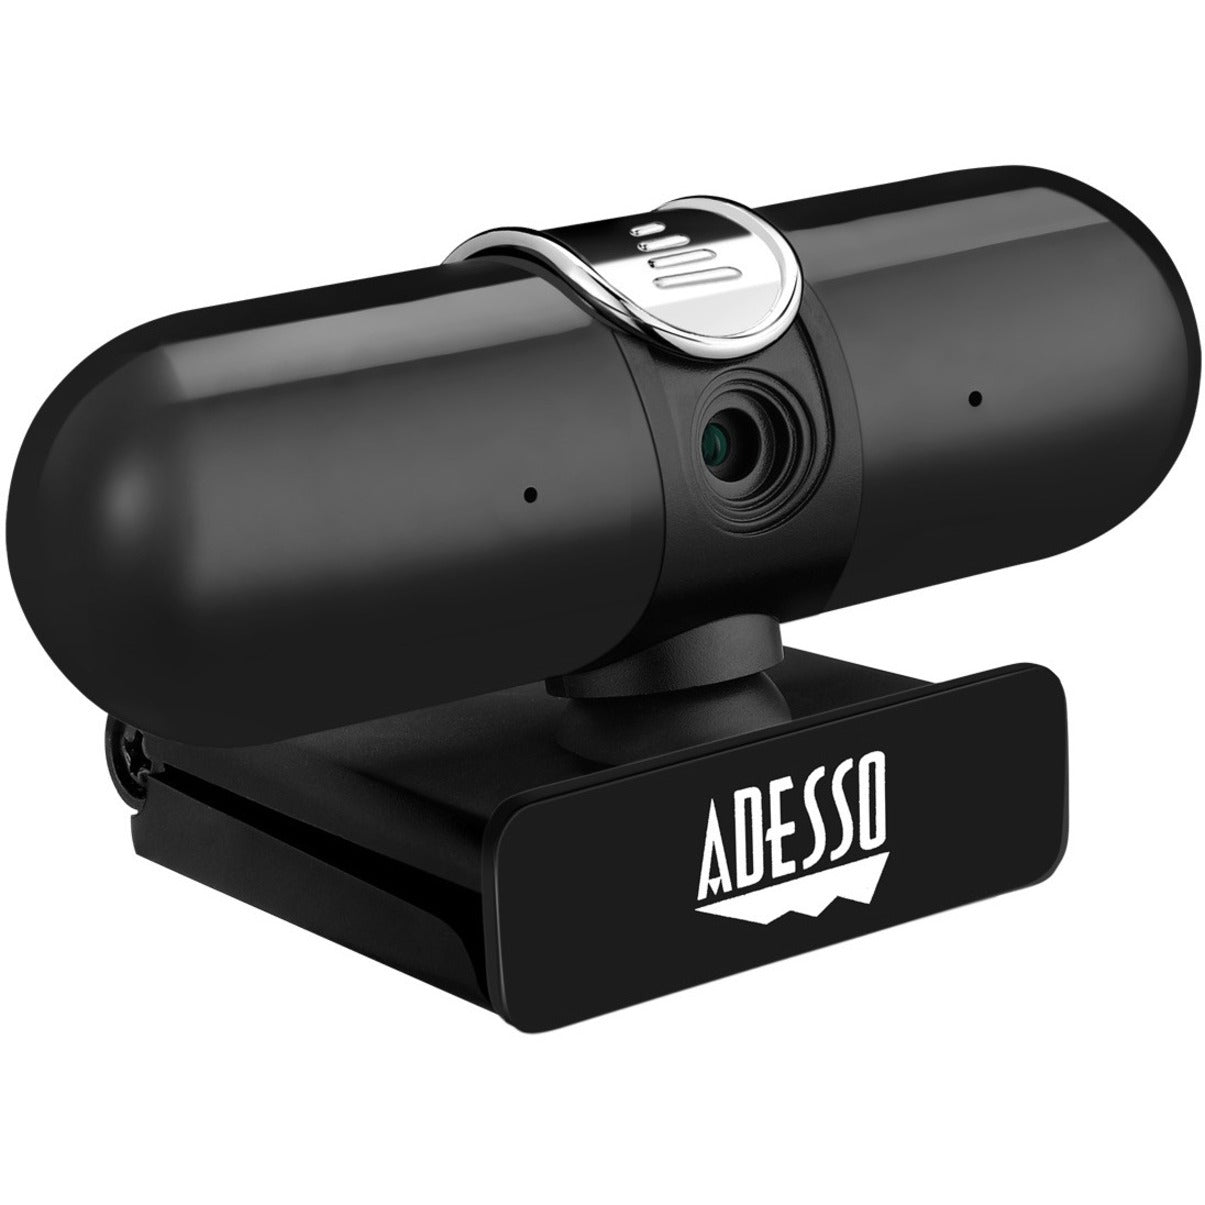 Adesso CYBERTRACK H7 2K QUAD HD Webcam with Autofocus, Built-in Mic & Privacy Cover